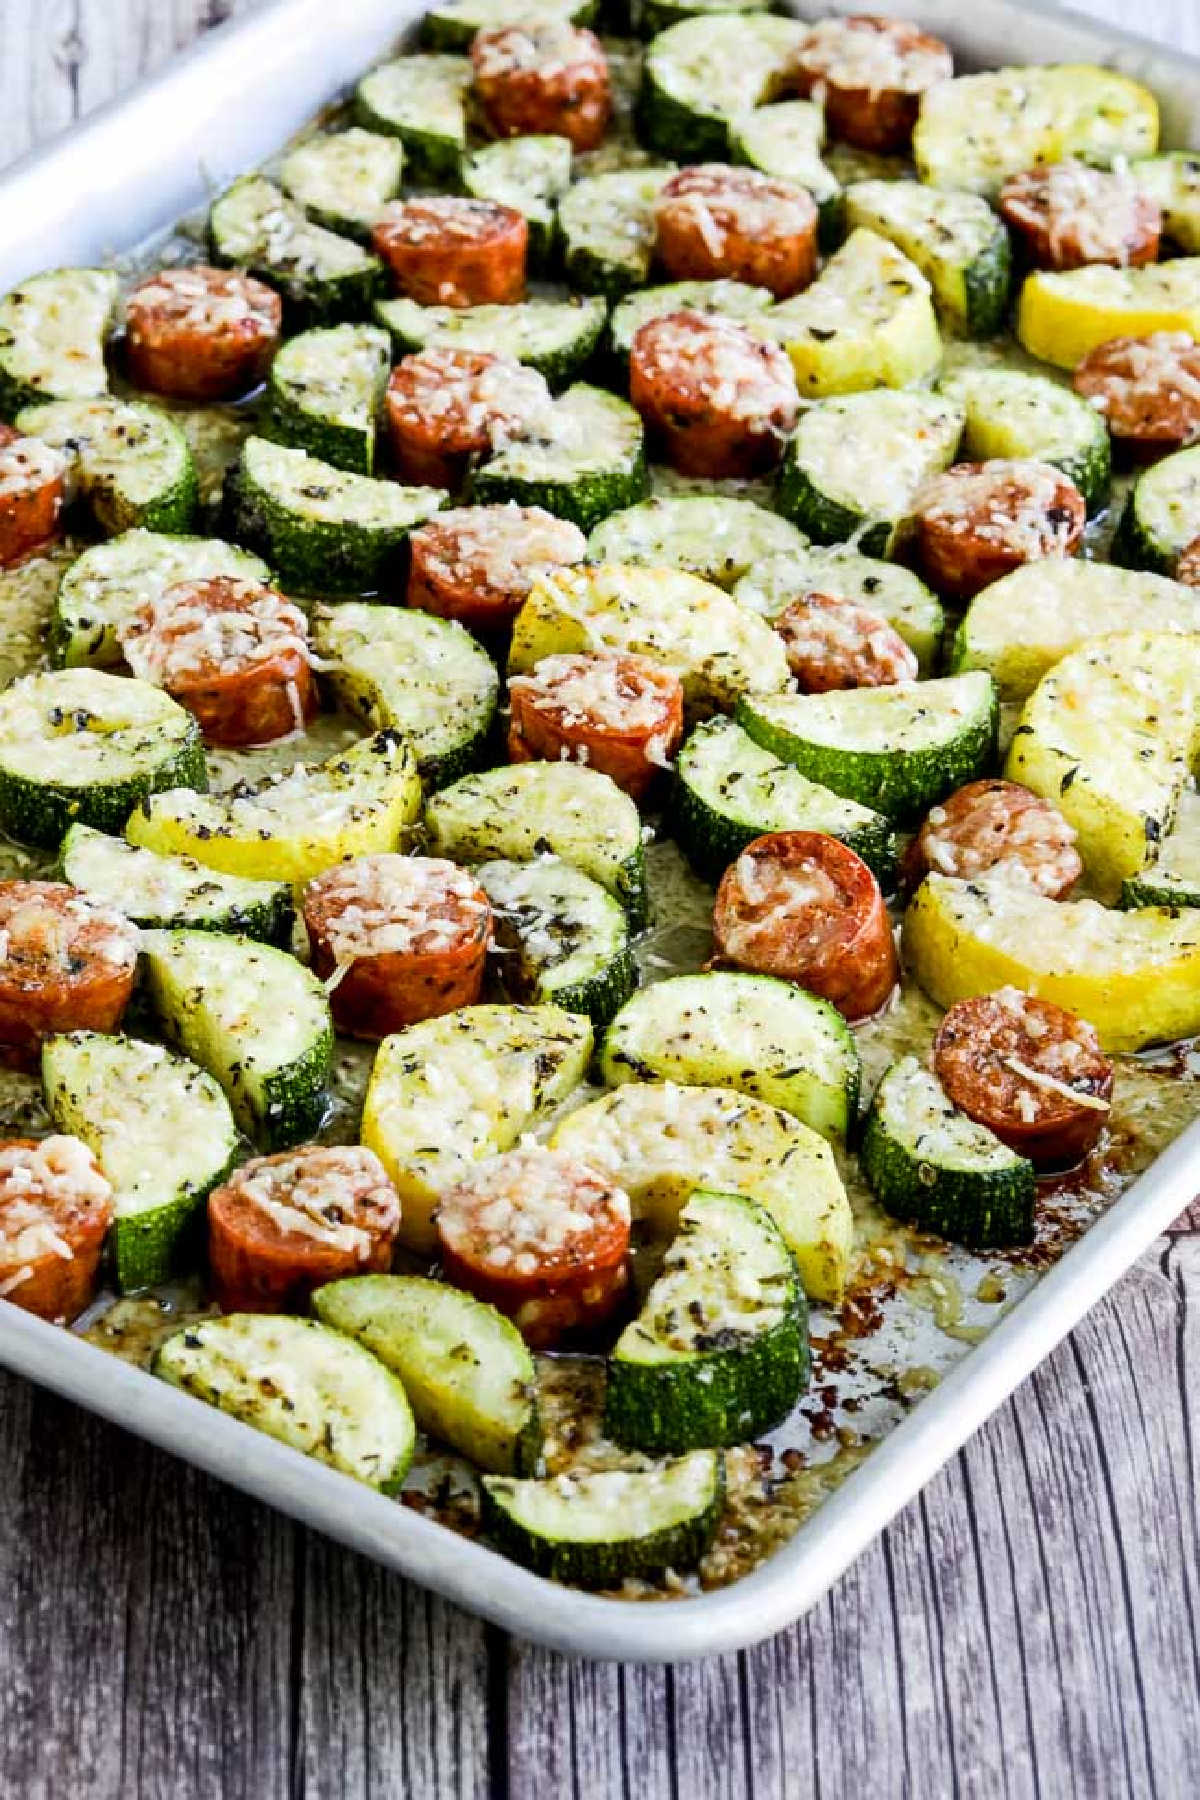 Cheesy Zucchini and Sausage Sheet Pan Meal shown on sheet pan on cutting. board